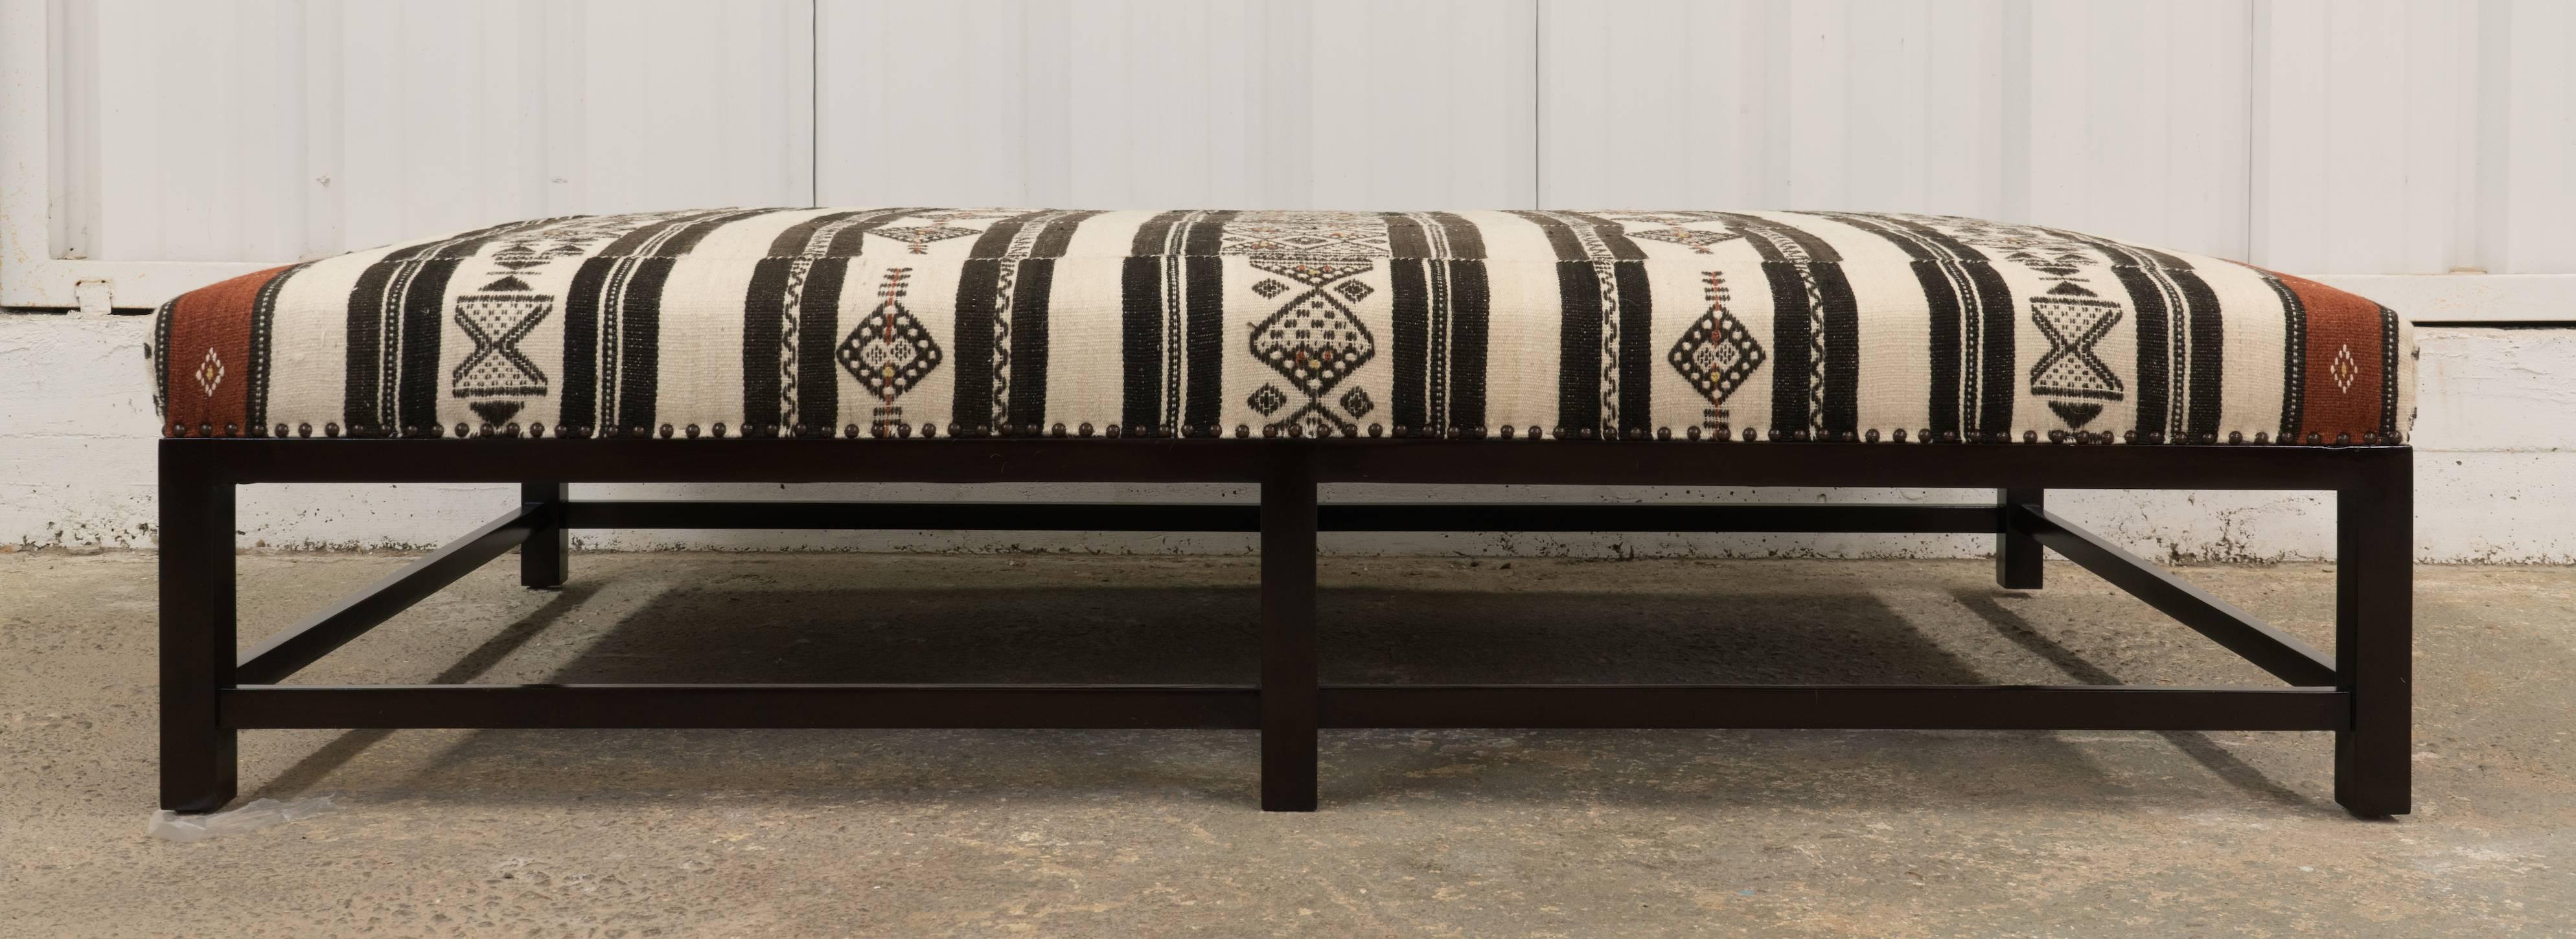 Handmade in Los Angeles, the Hollywood at Home Lexington Ottoman, upholstered in a vintage black and white textile with antiqued bronze nail head trim and a dark walnut finish on wood base.